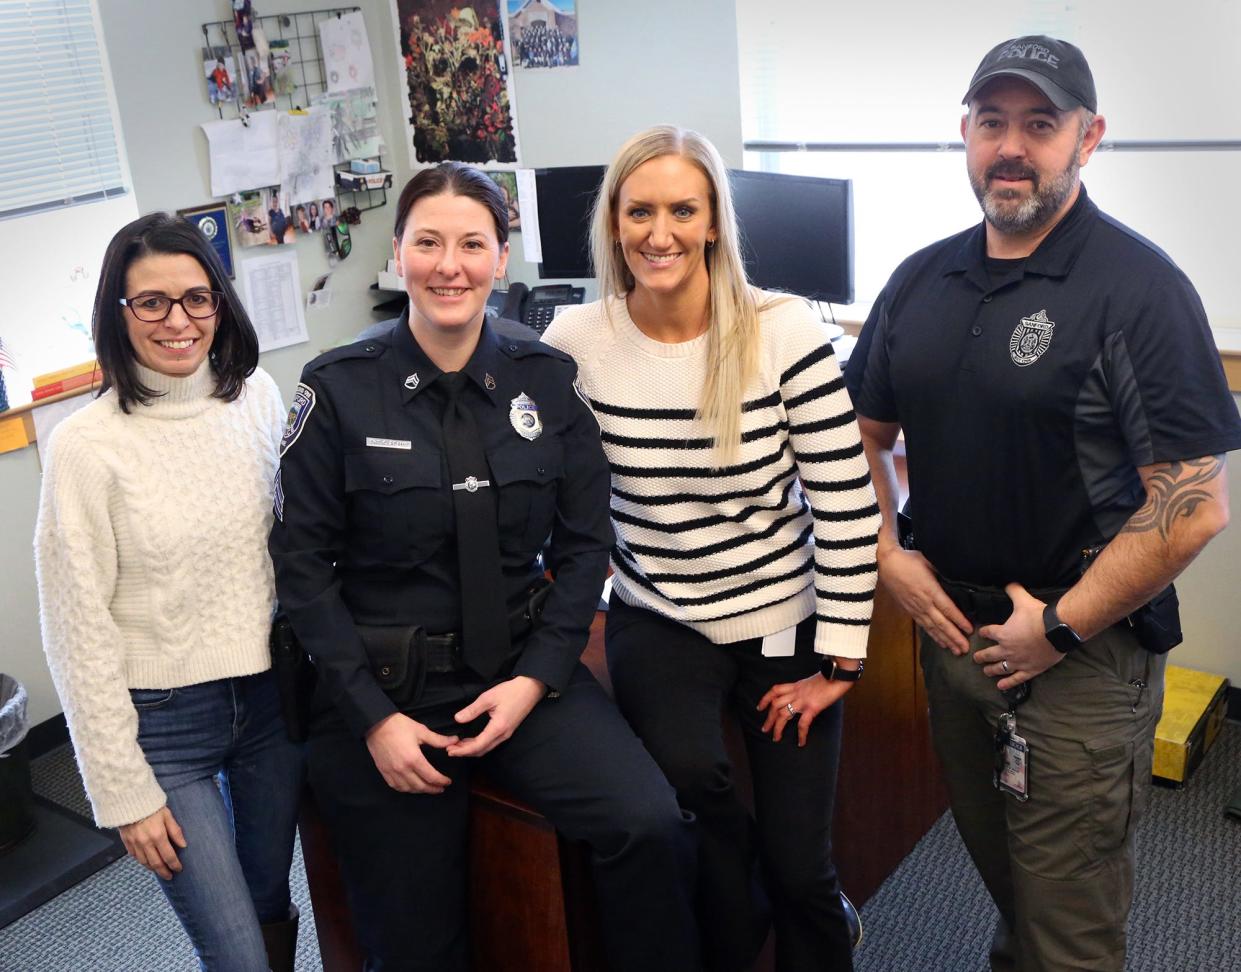 Sanford police Sgt. Colleen Adams leads the Sanford Police Department's Mental Health Unit. She says she wouldn't be able to do the work without her team. From left are OPTIONS Clinician Lacey Bailey, Sgt. Adams, Shannon Bentley, a mental health first responder/clinician and officer Dave Randt.